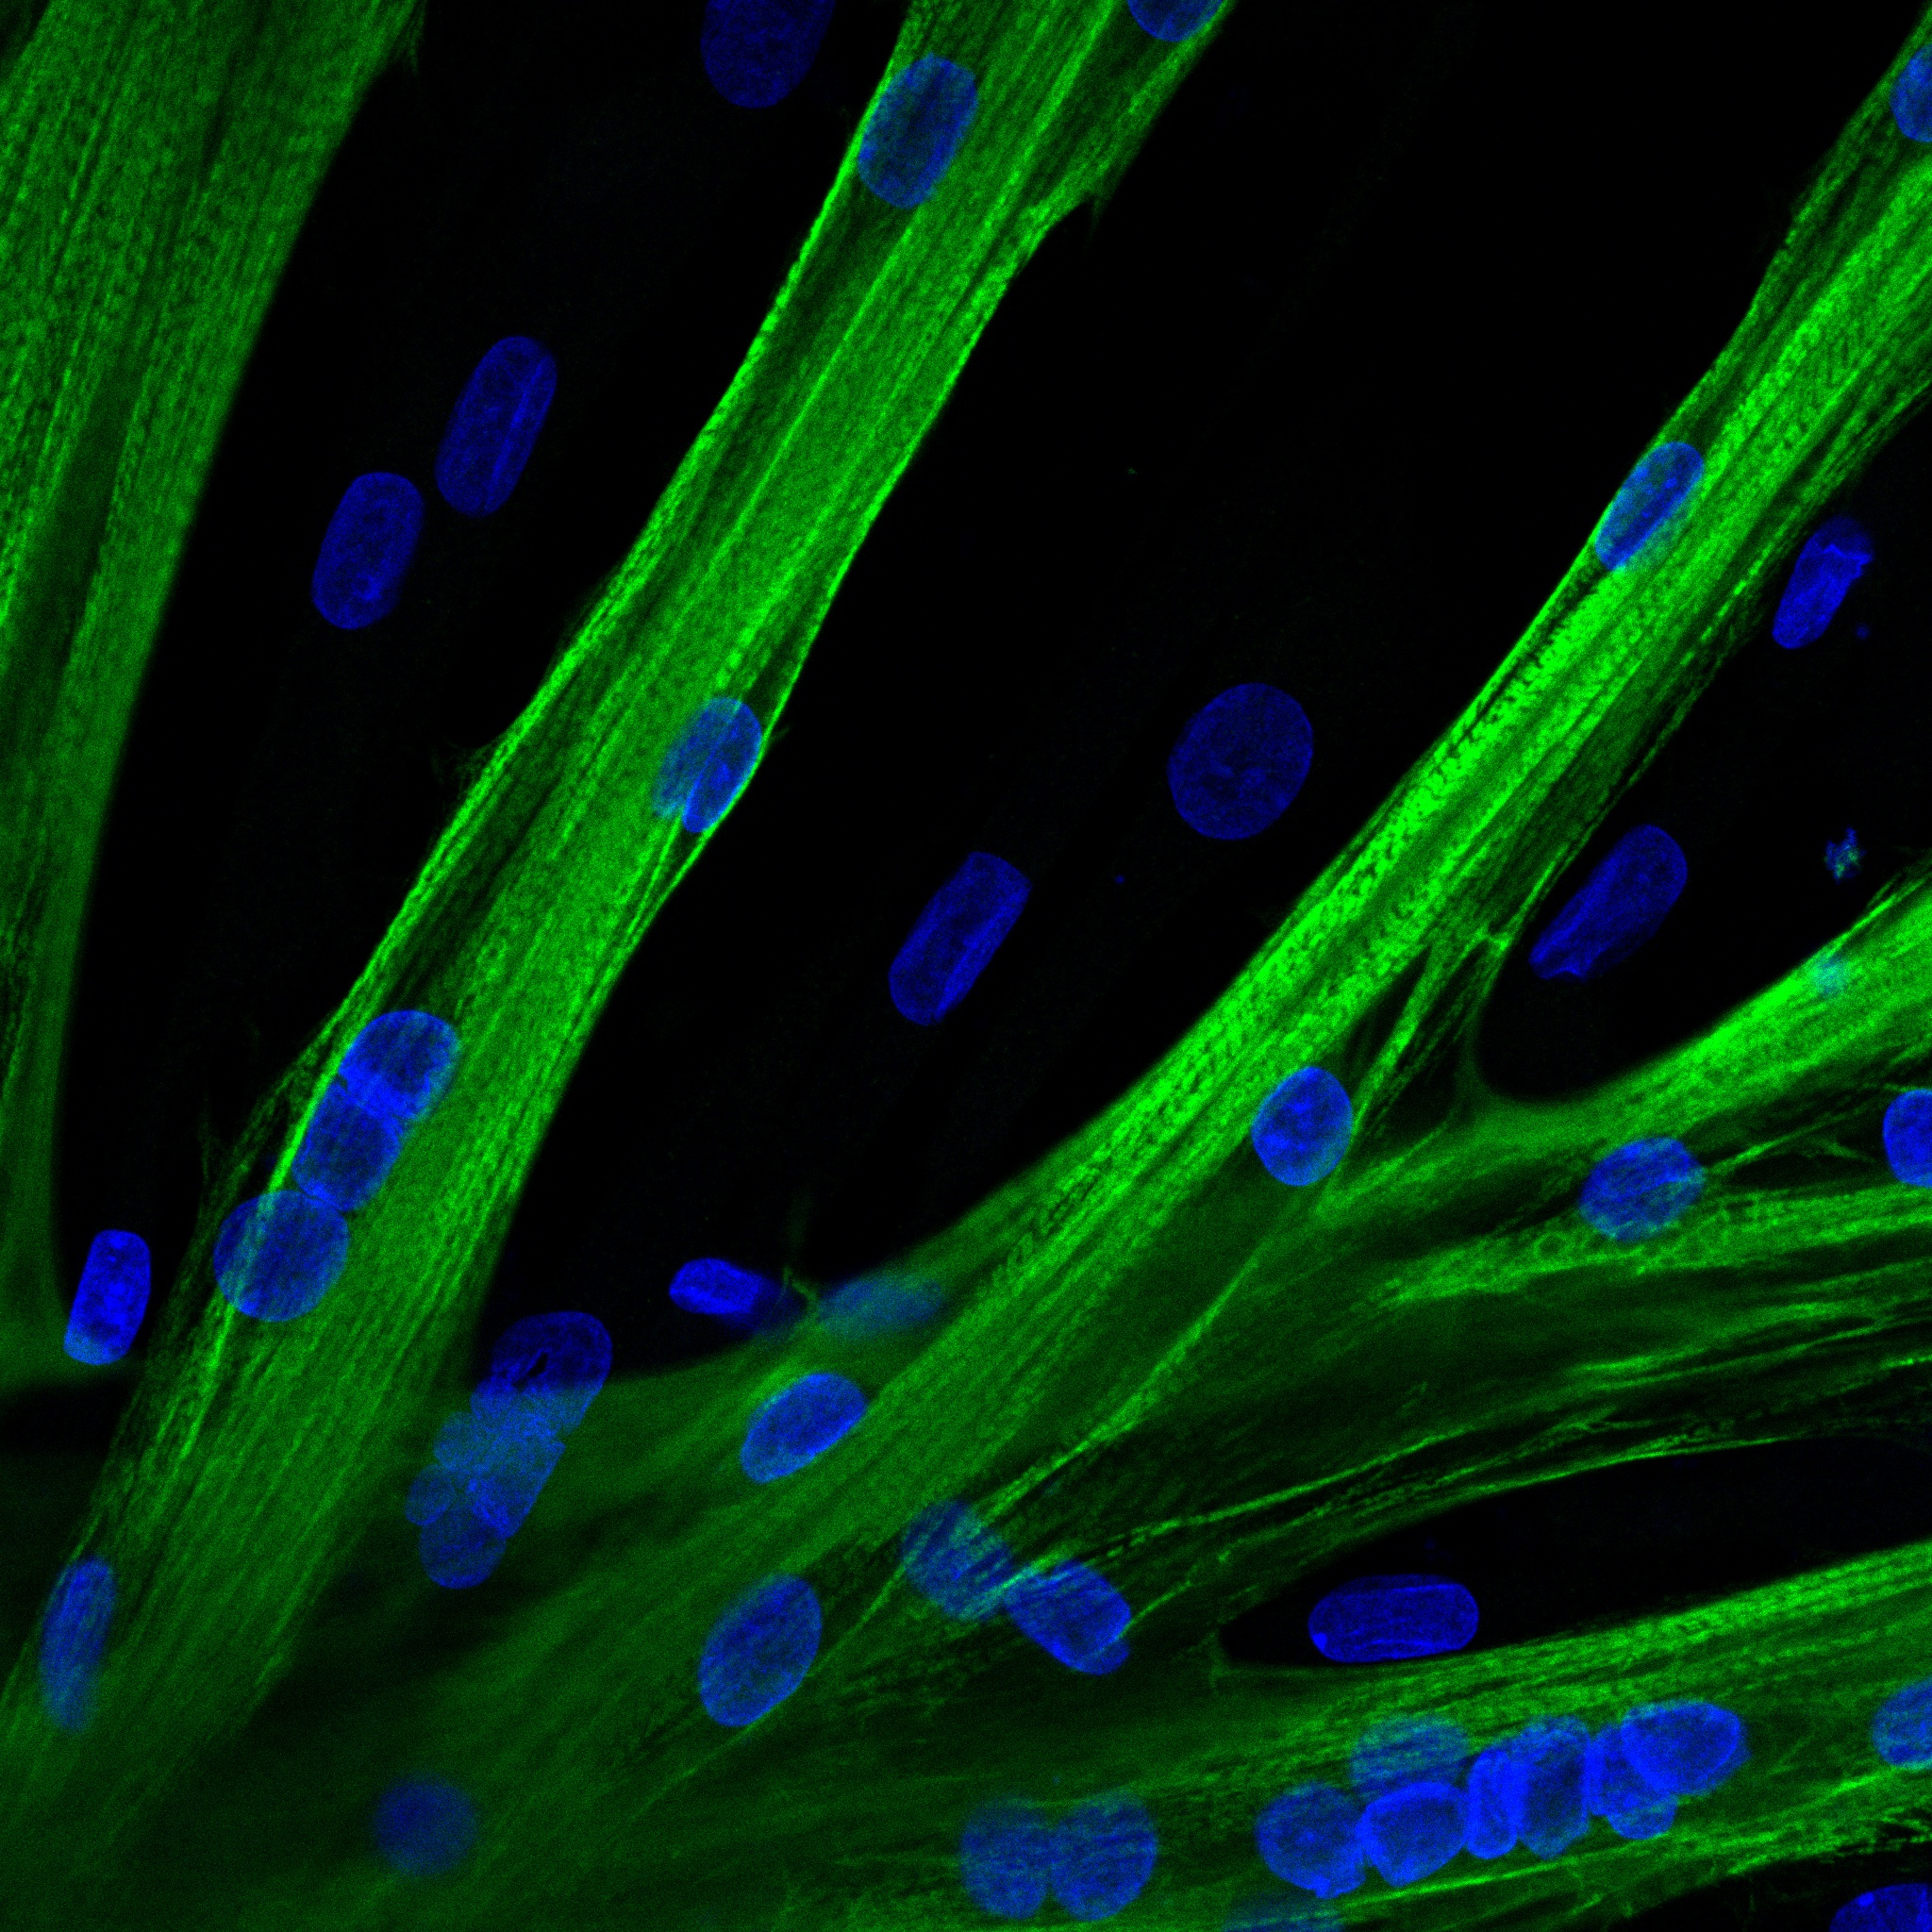 The human muscle stem cells fused into multinucleated myotubes following mRNA-mediated CRISPR-Cas9 gene editing. A myosin heavy chain is seen in green and the nuclei in blue. Photo: Spuler Lab